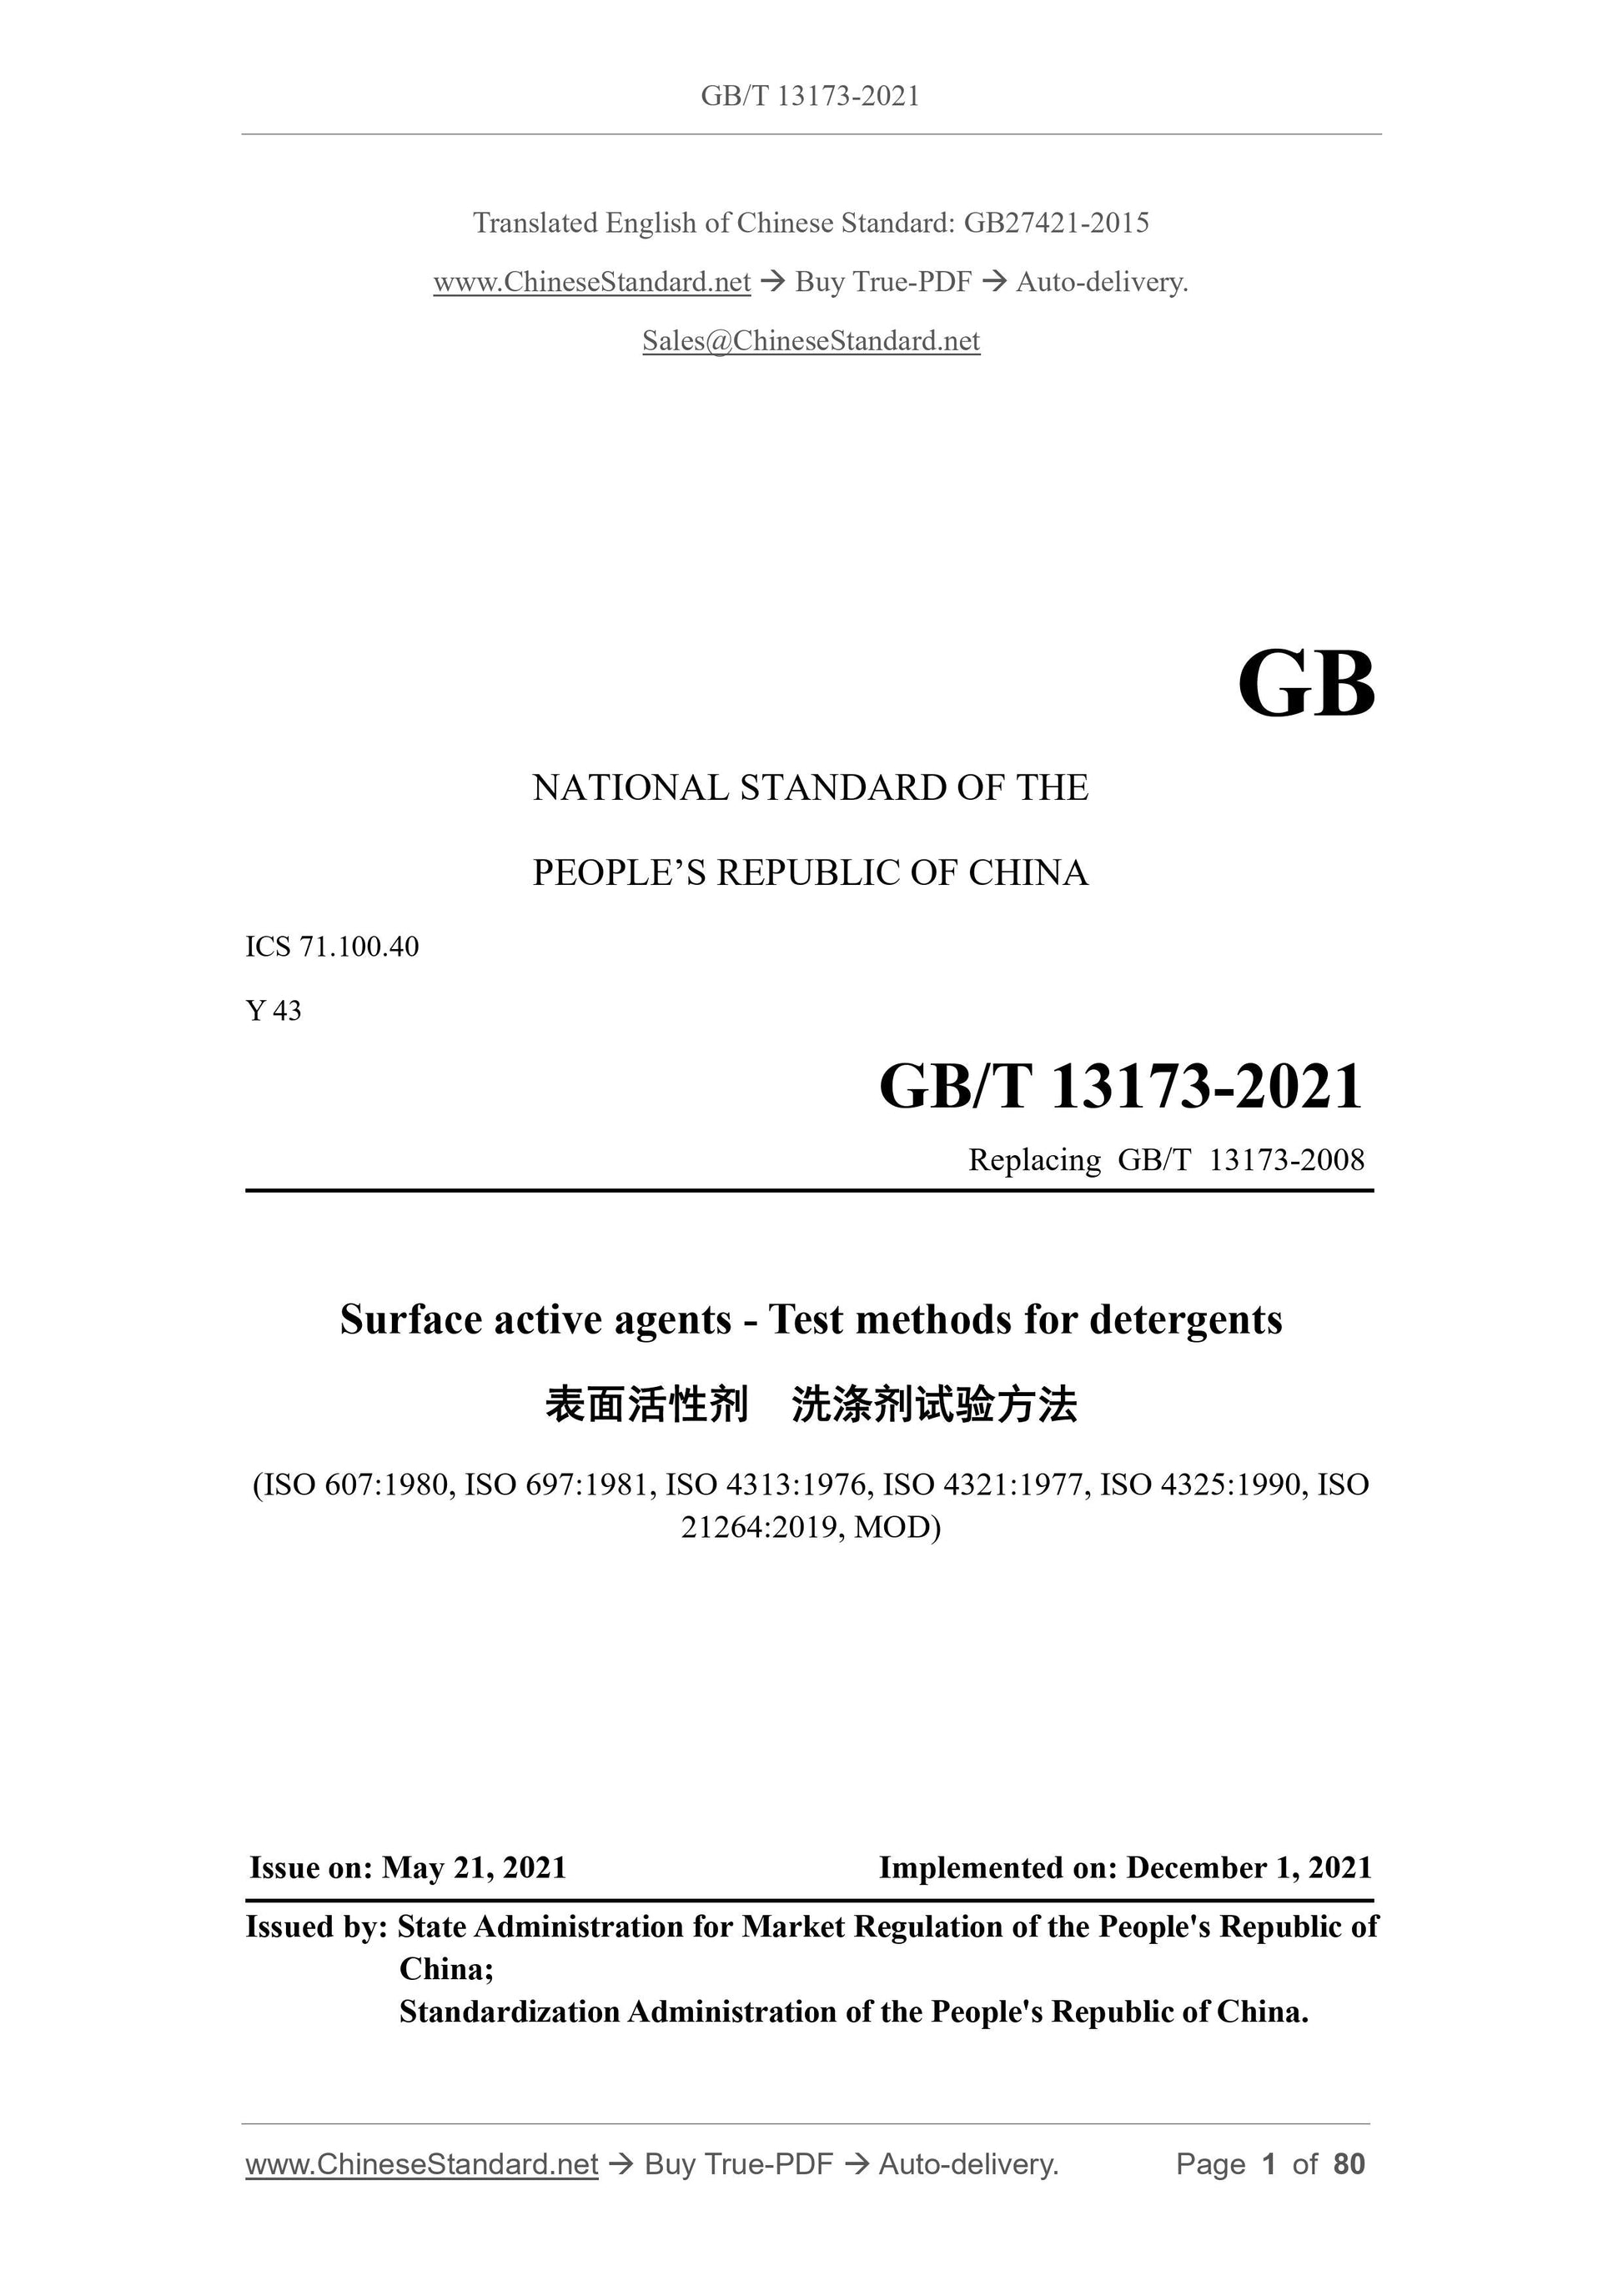 GB/T 13173-2021 Page 1